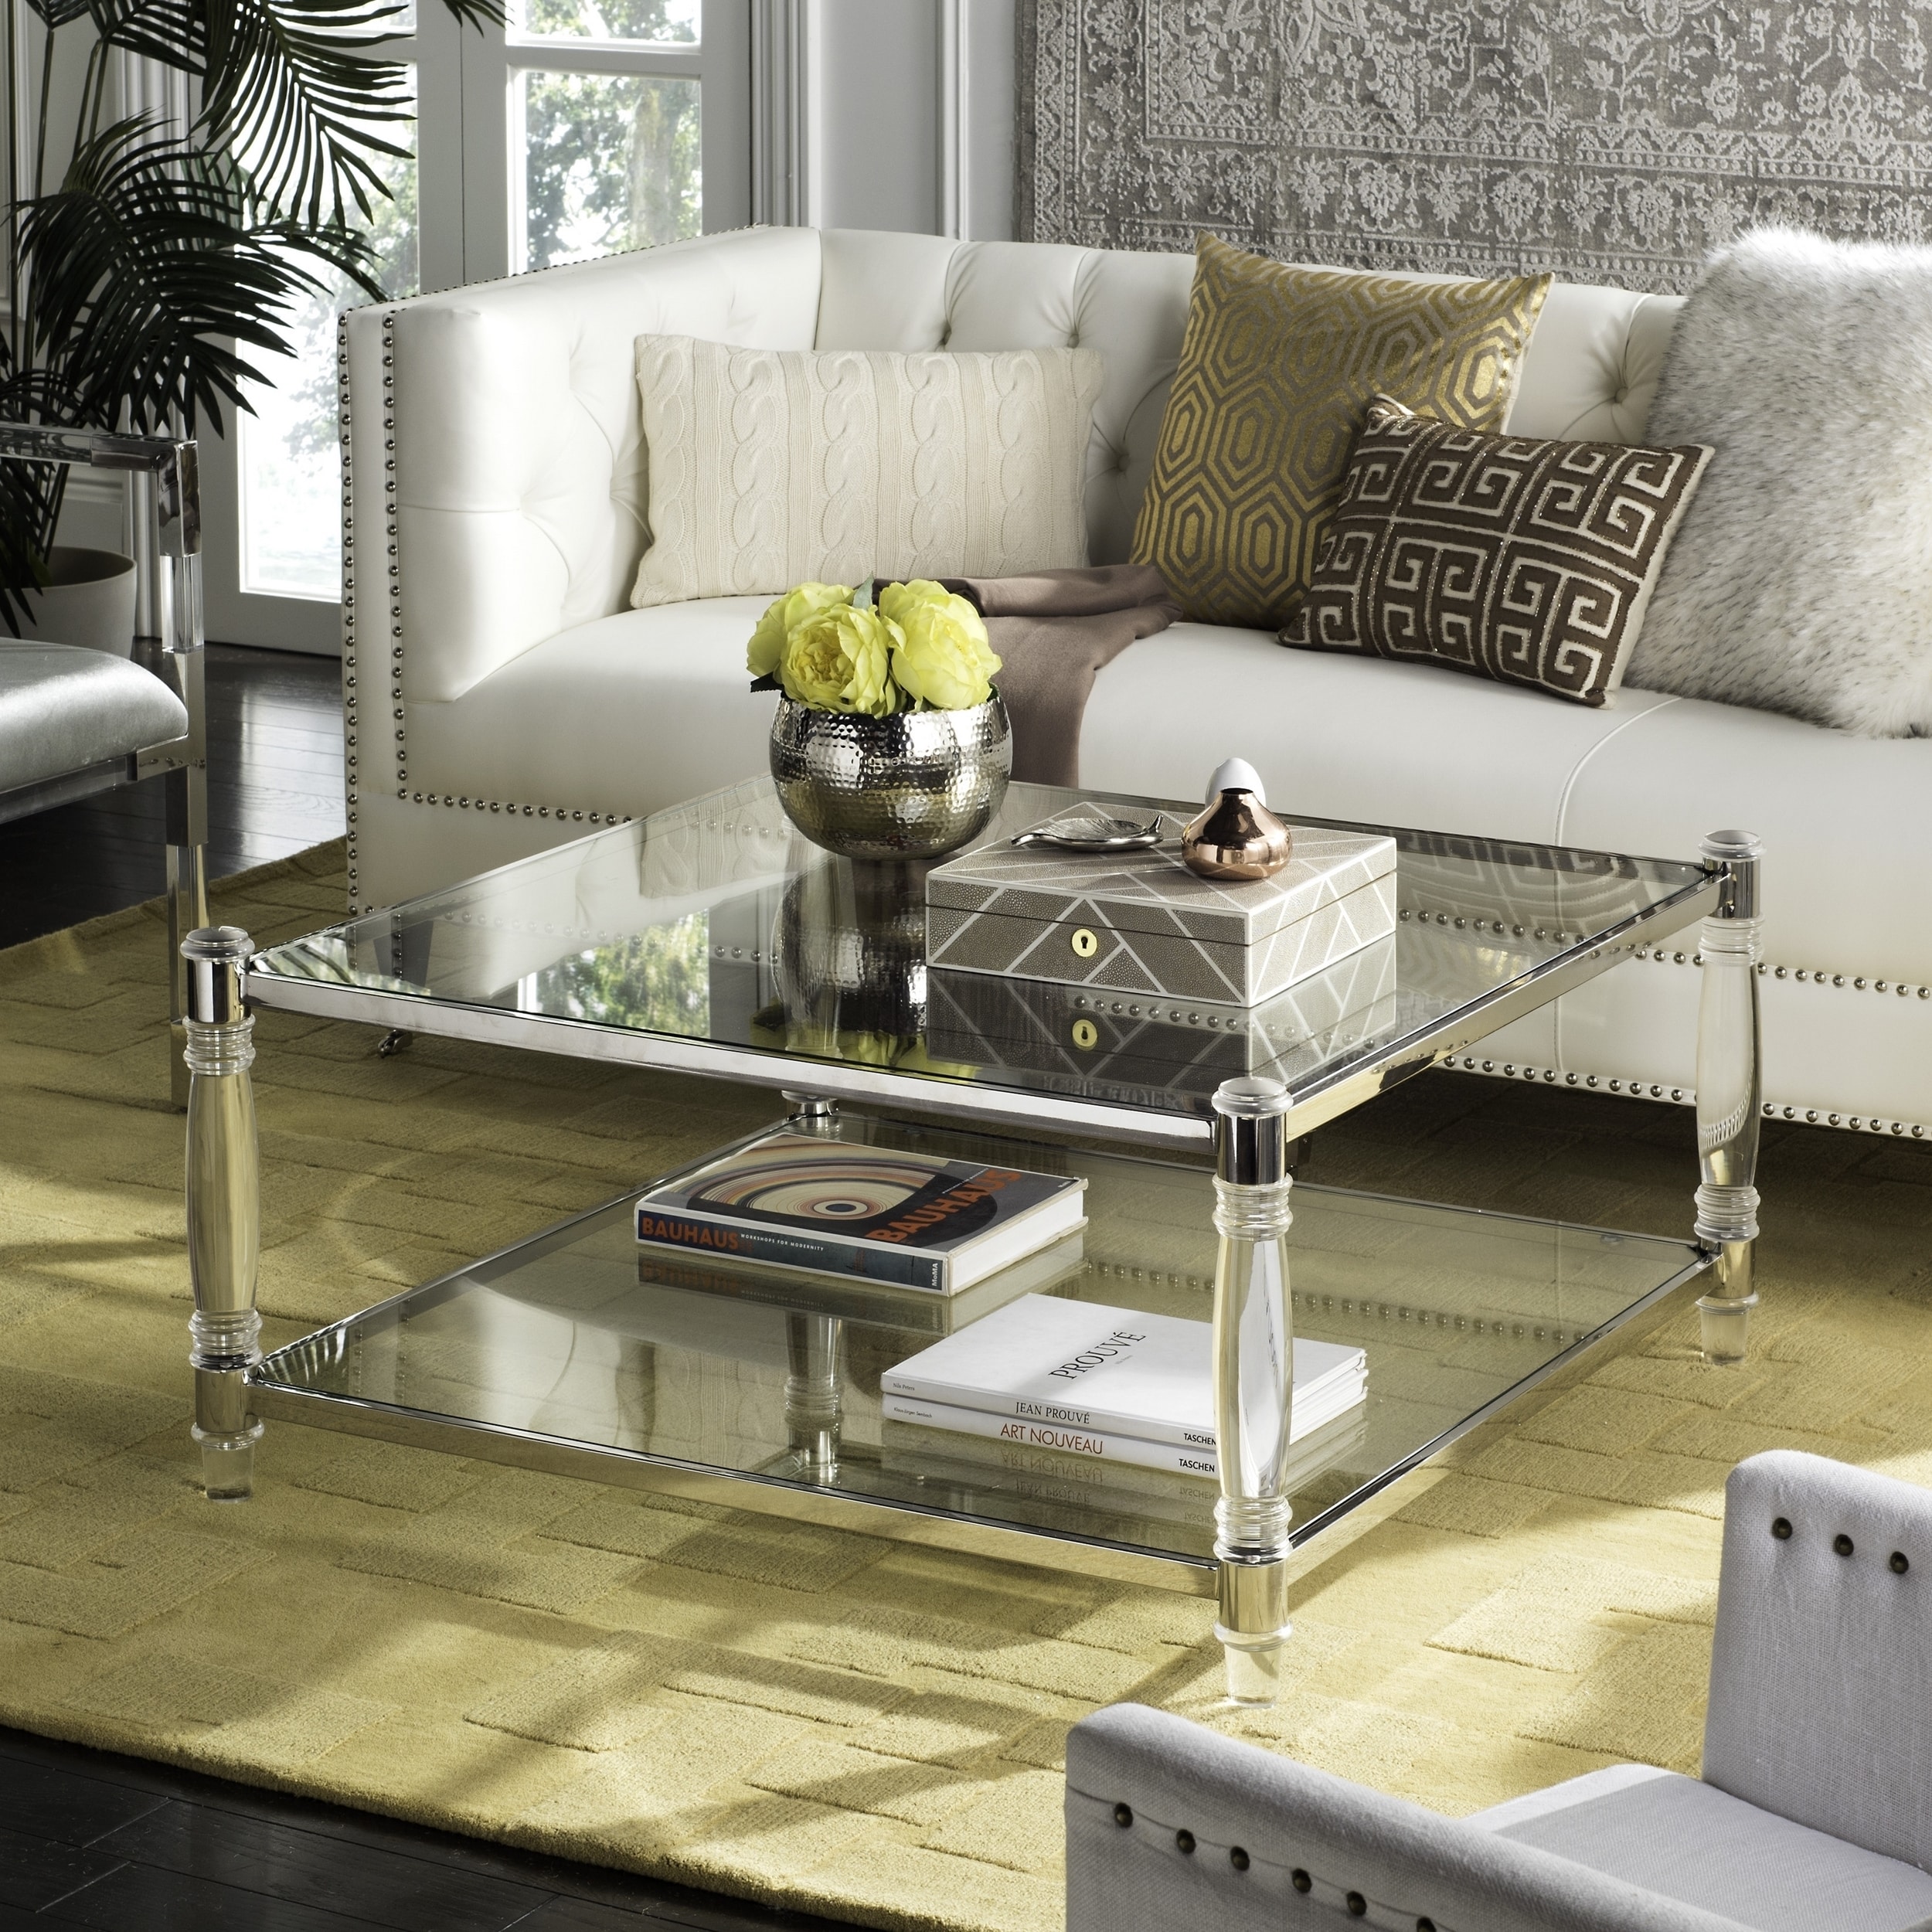 Safavieh Couture High Line Collection Isabelle Acrylic Silver Coffee Table 385 W X 385 L X 177 H Overstock 14626777